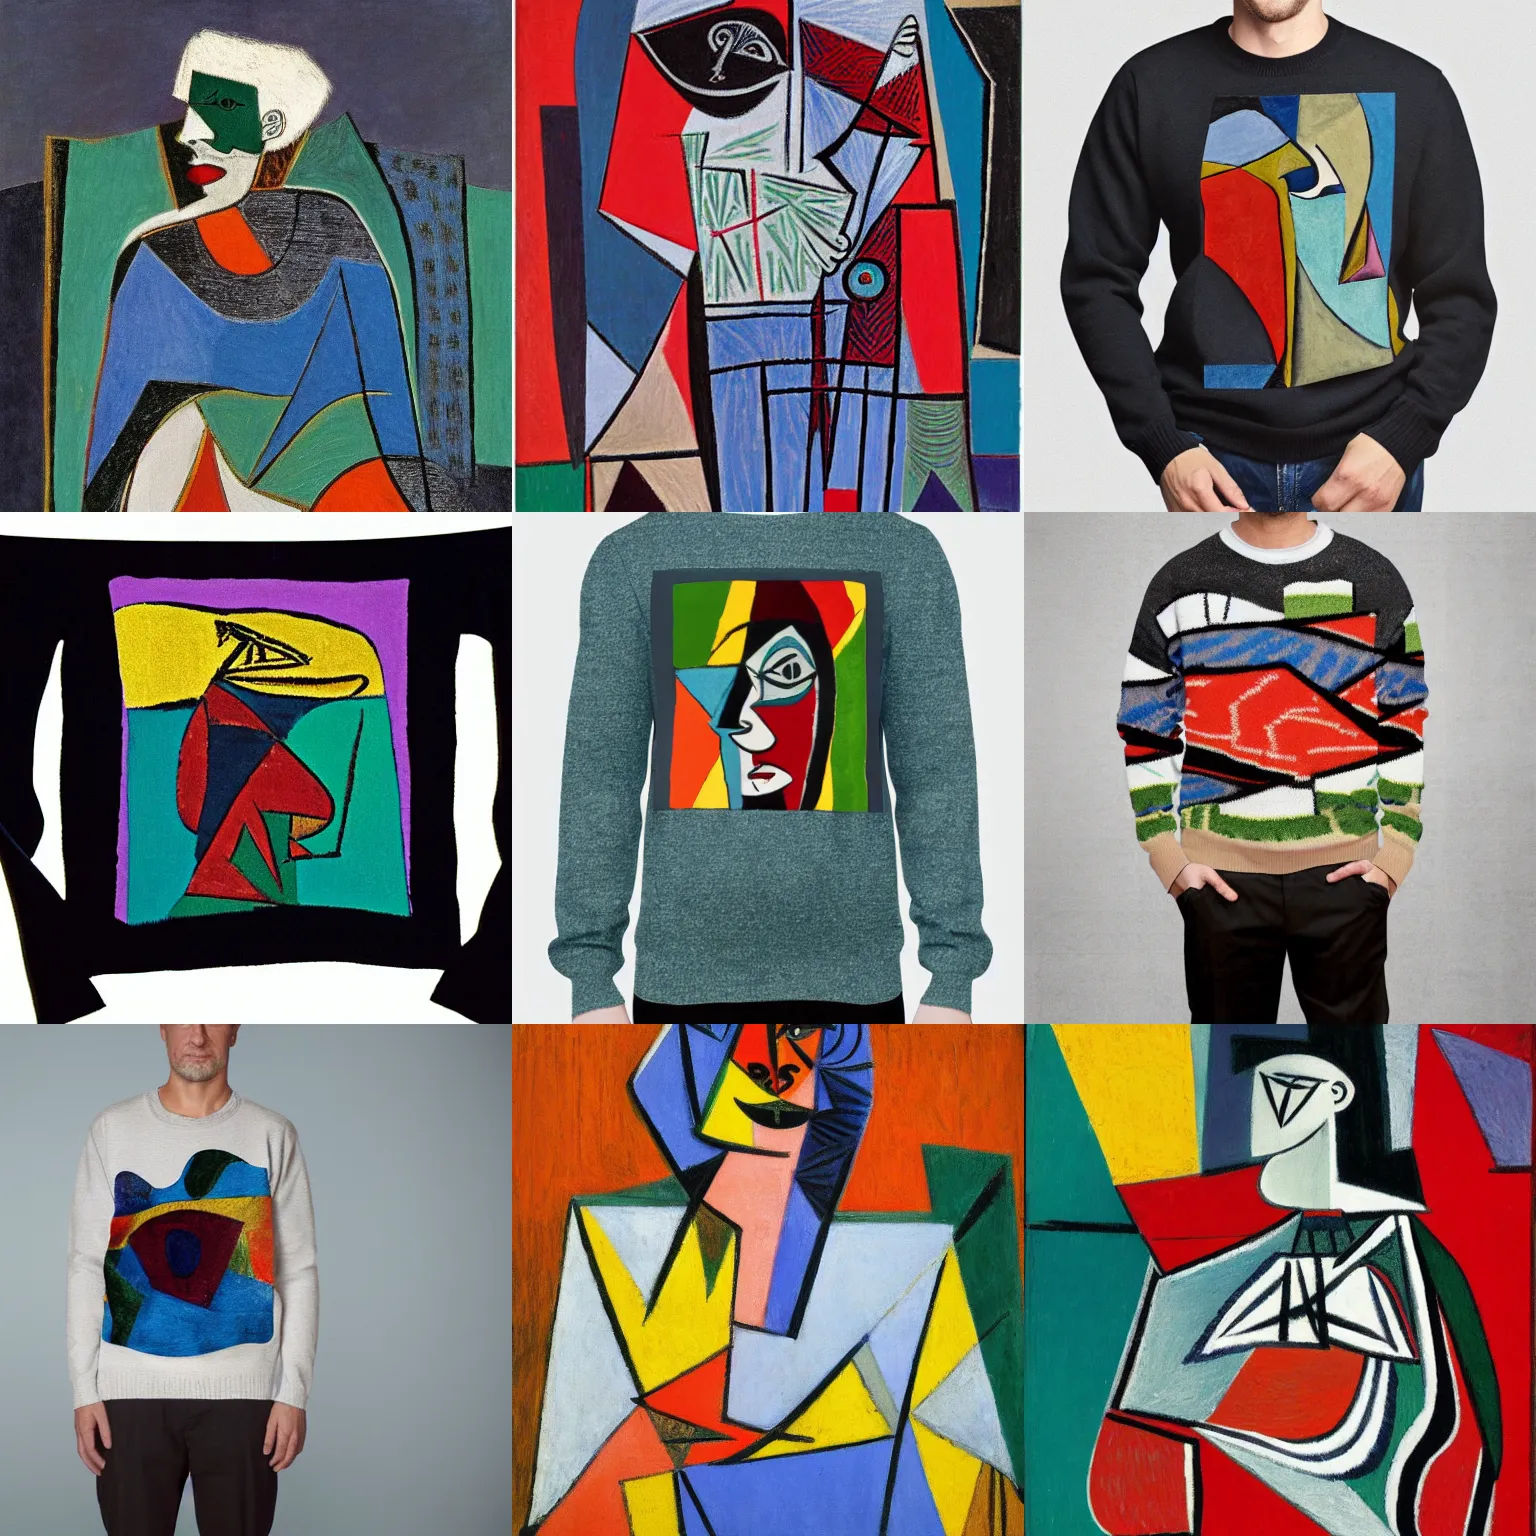 Prompt: the county poet dressed in abstract art sweater, by picasso